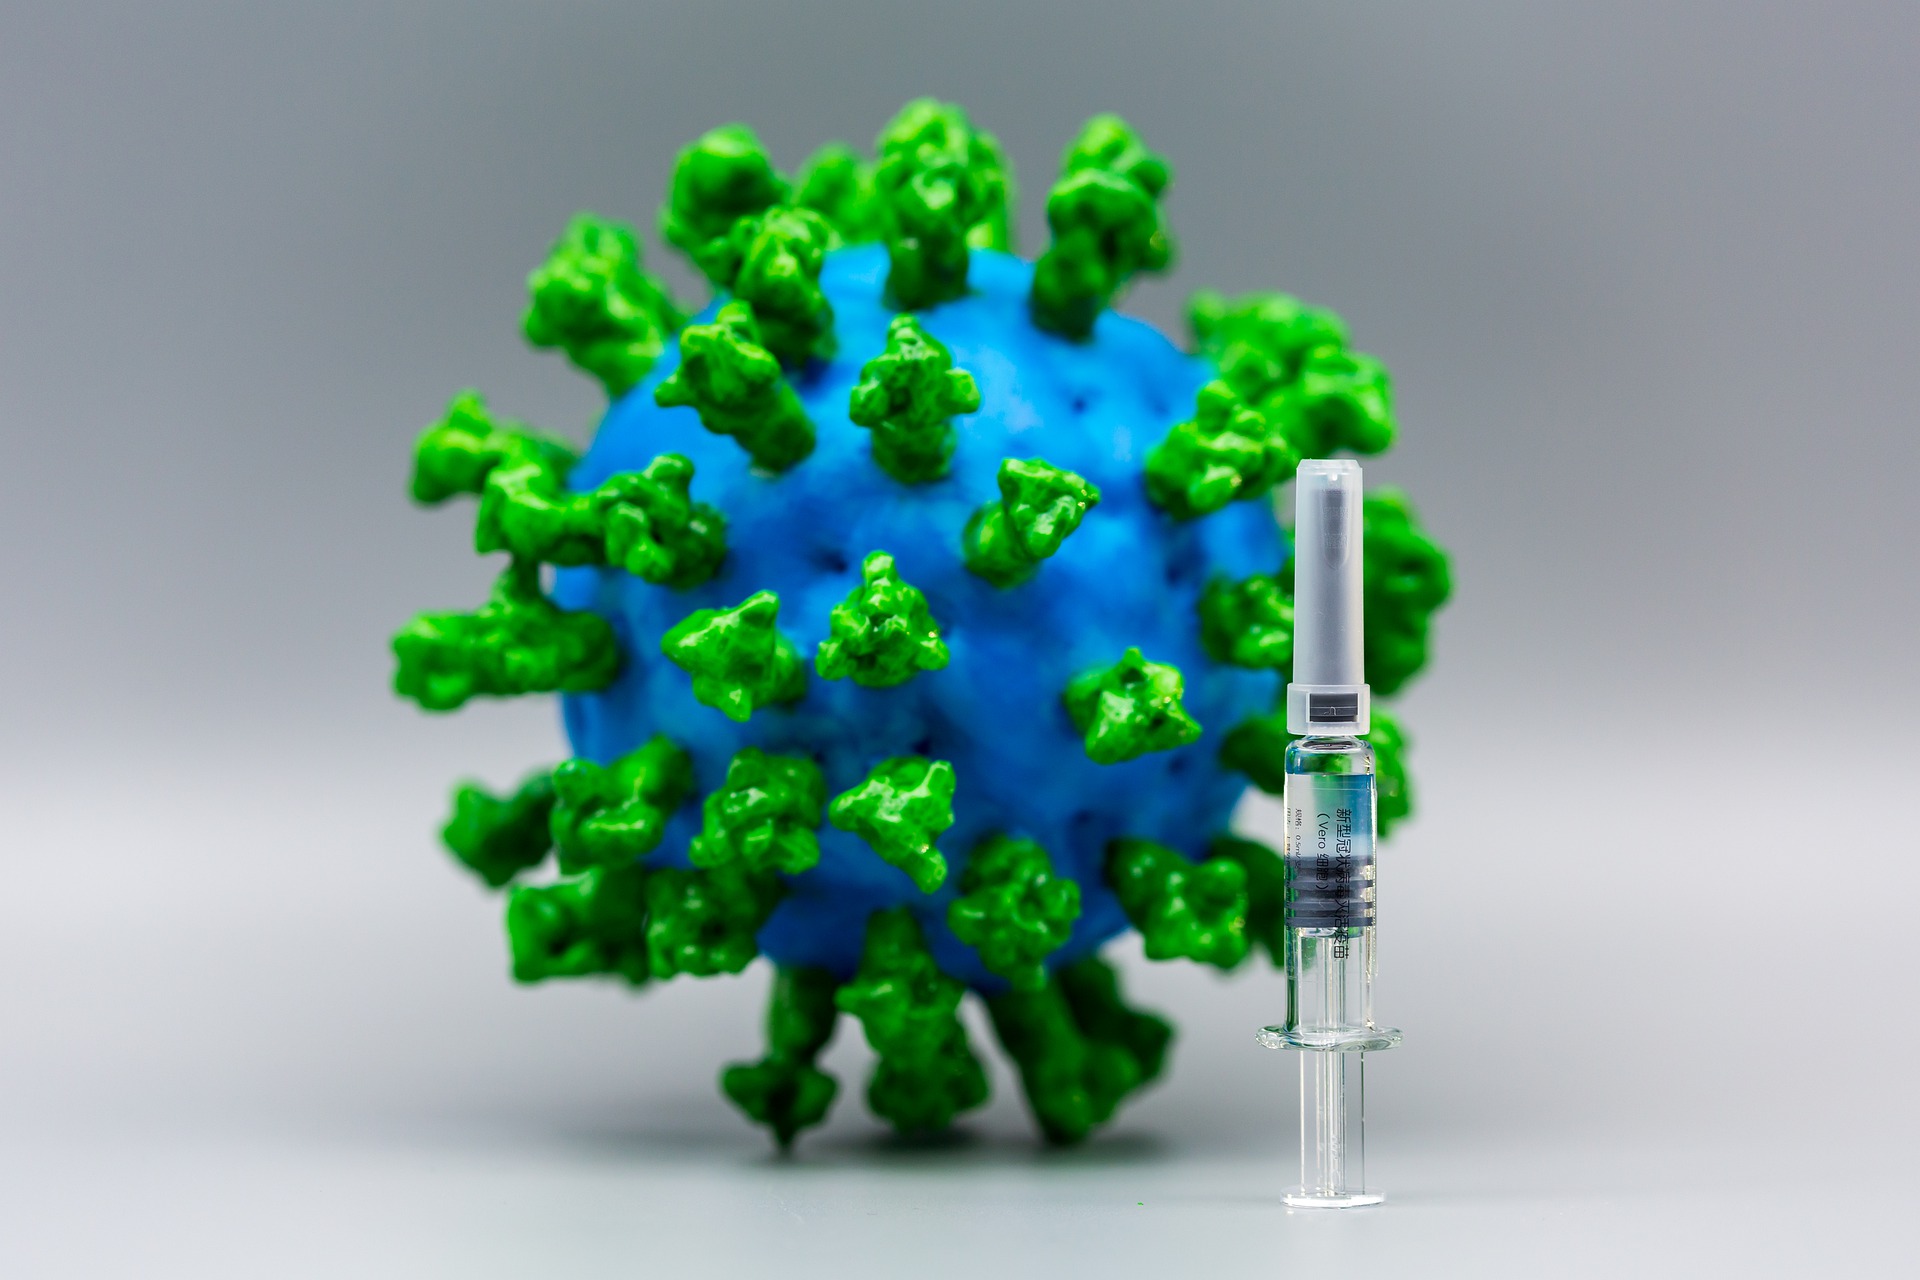 Developing a vaccine for COVID-19